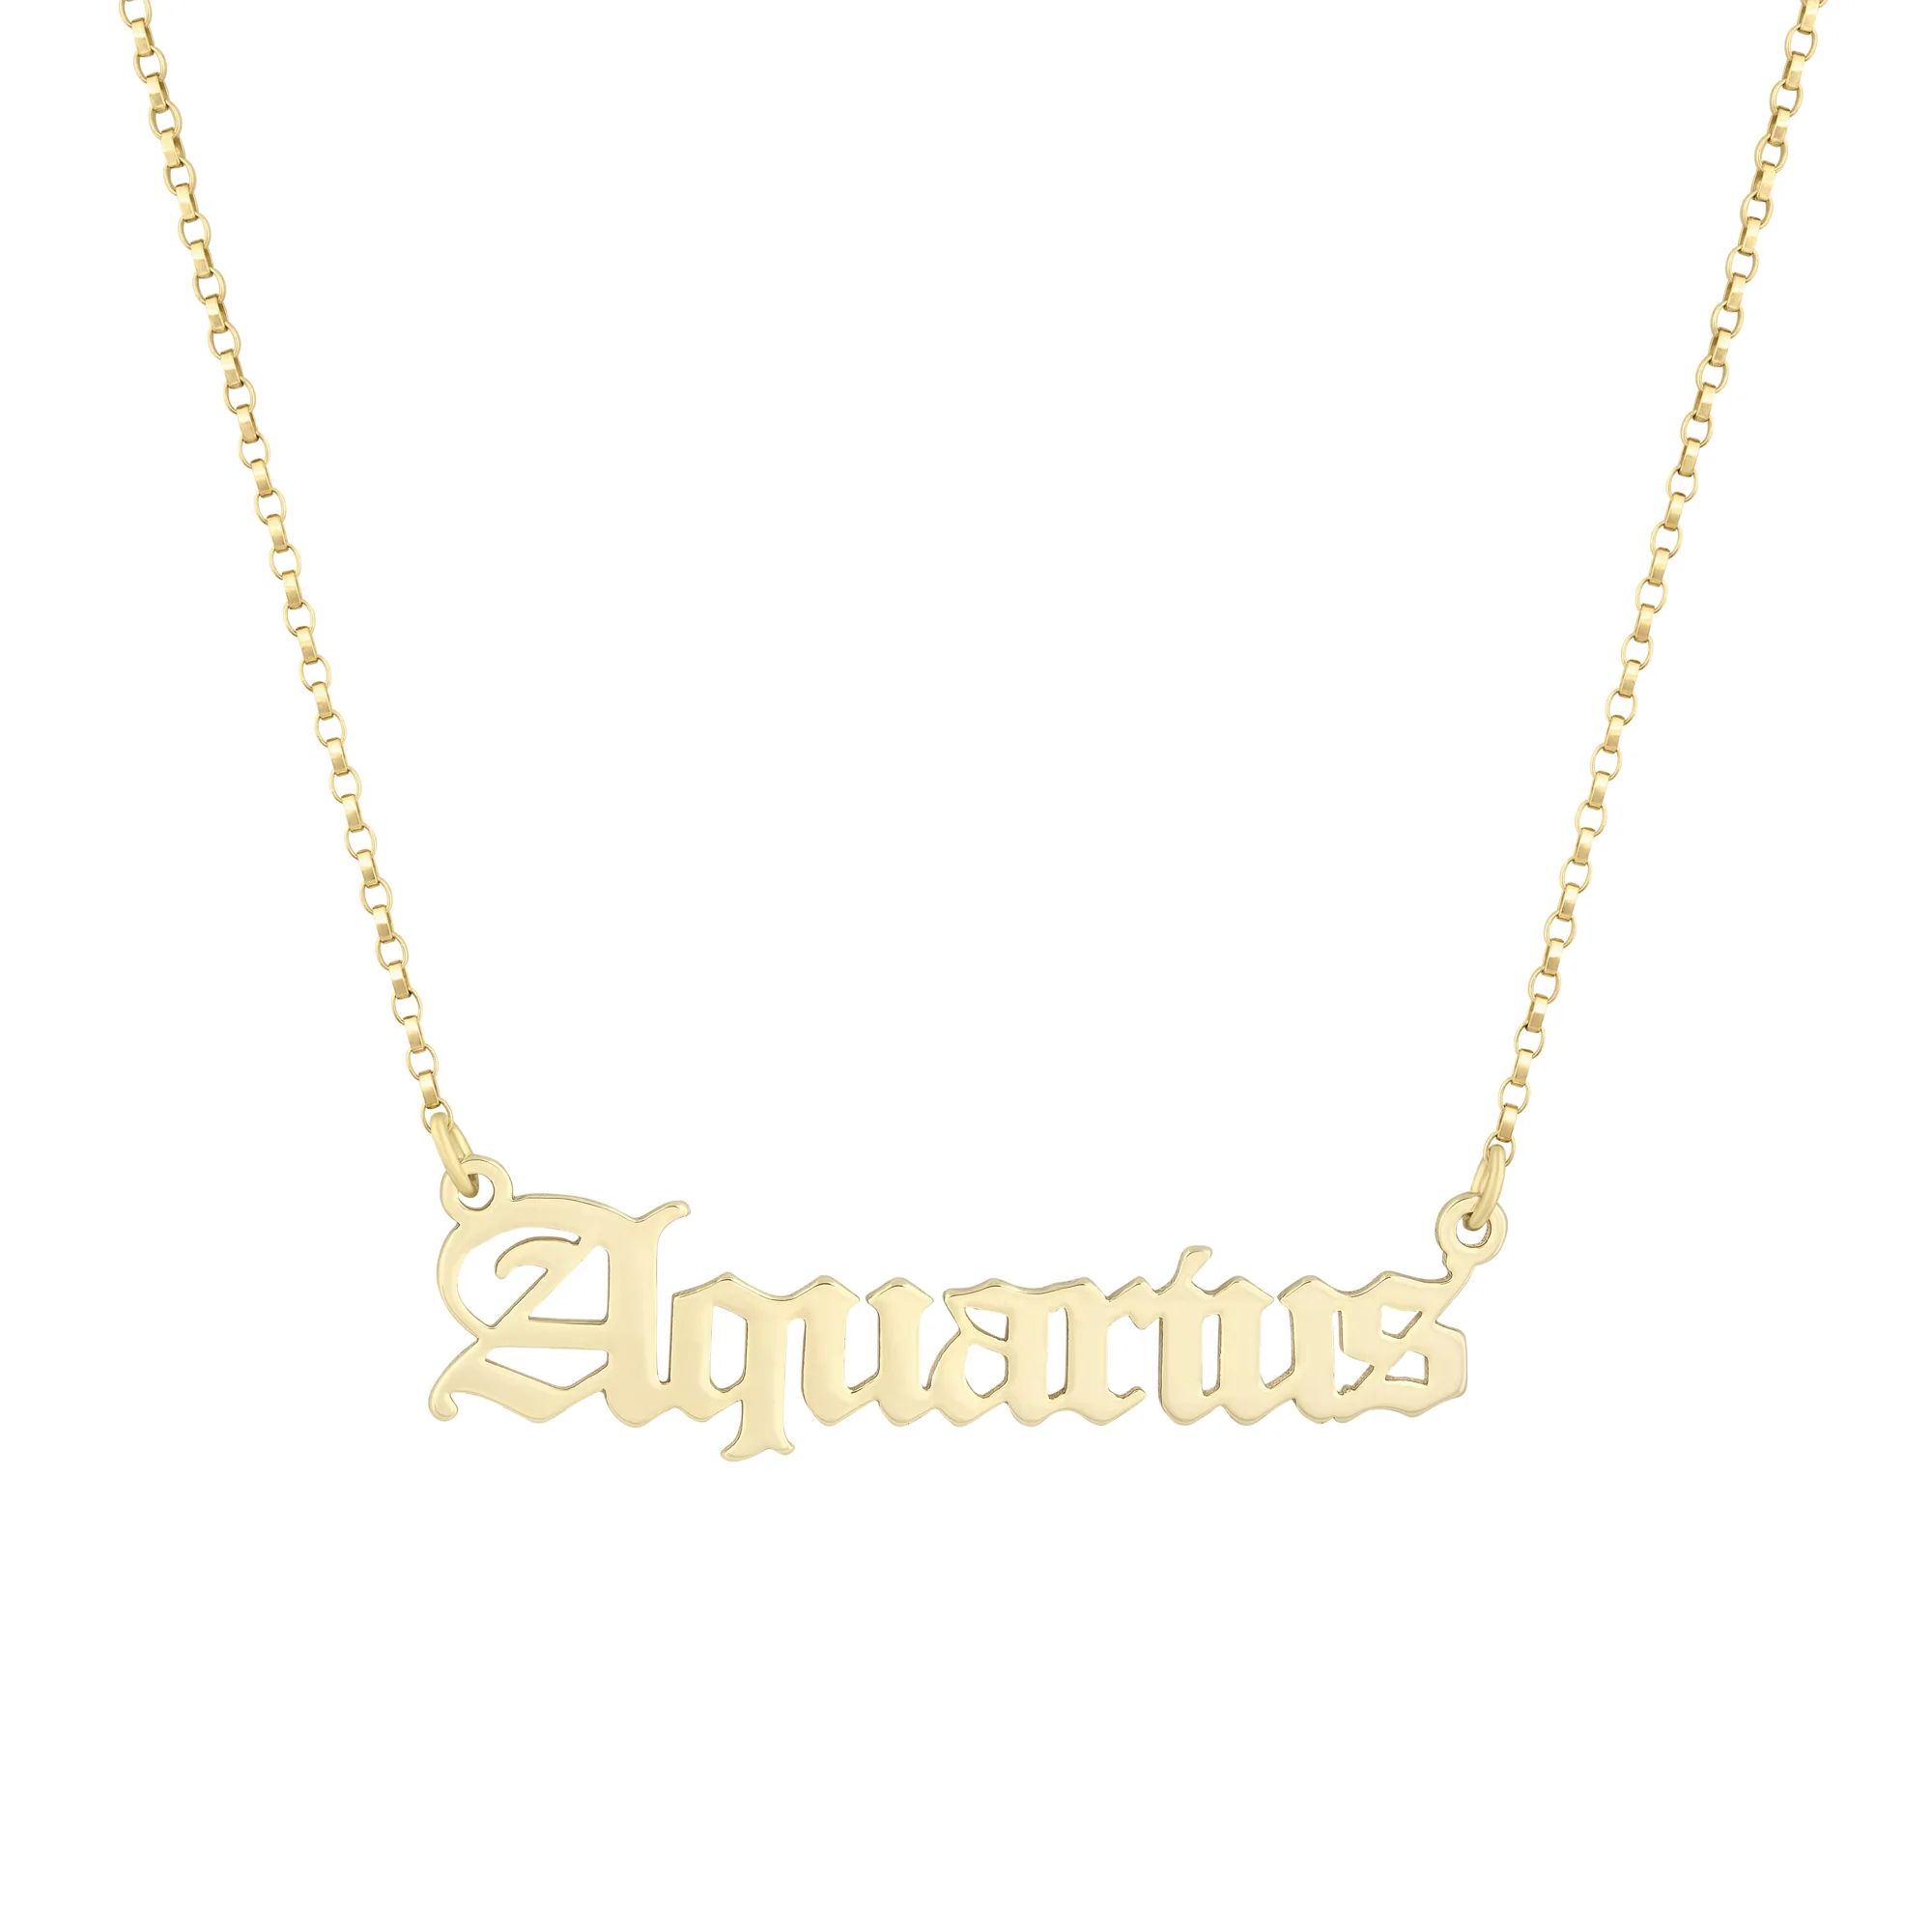 Astrology Necklace | Electric Picks Jewelry